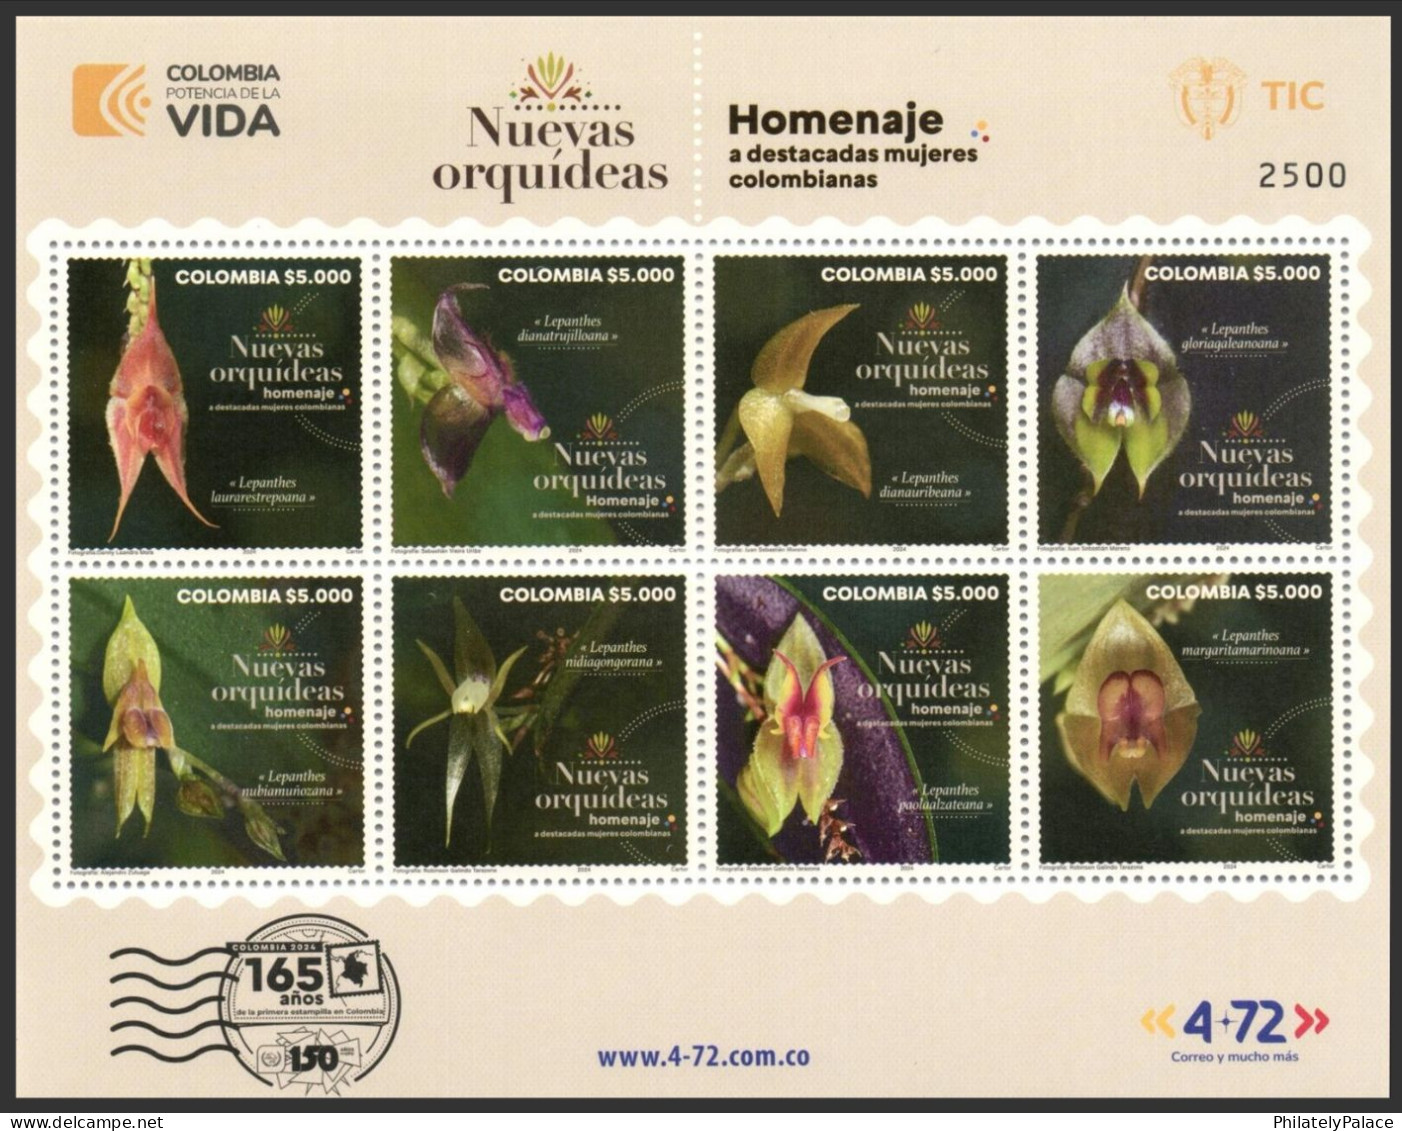 COLOMBIA 2024 ORCHIDS - Exotic Flowers, Flora, Plant, Outstanding Colombian Women, Set 8v MNH (**) - Colombia